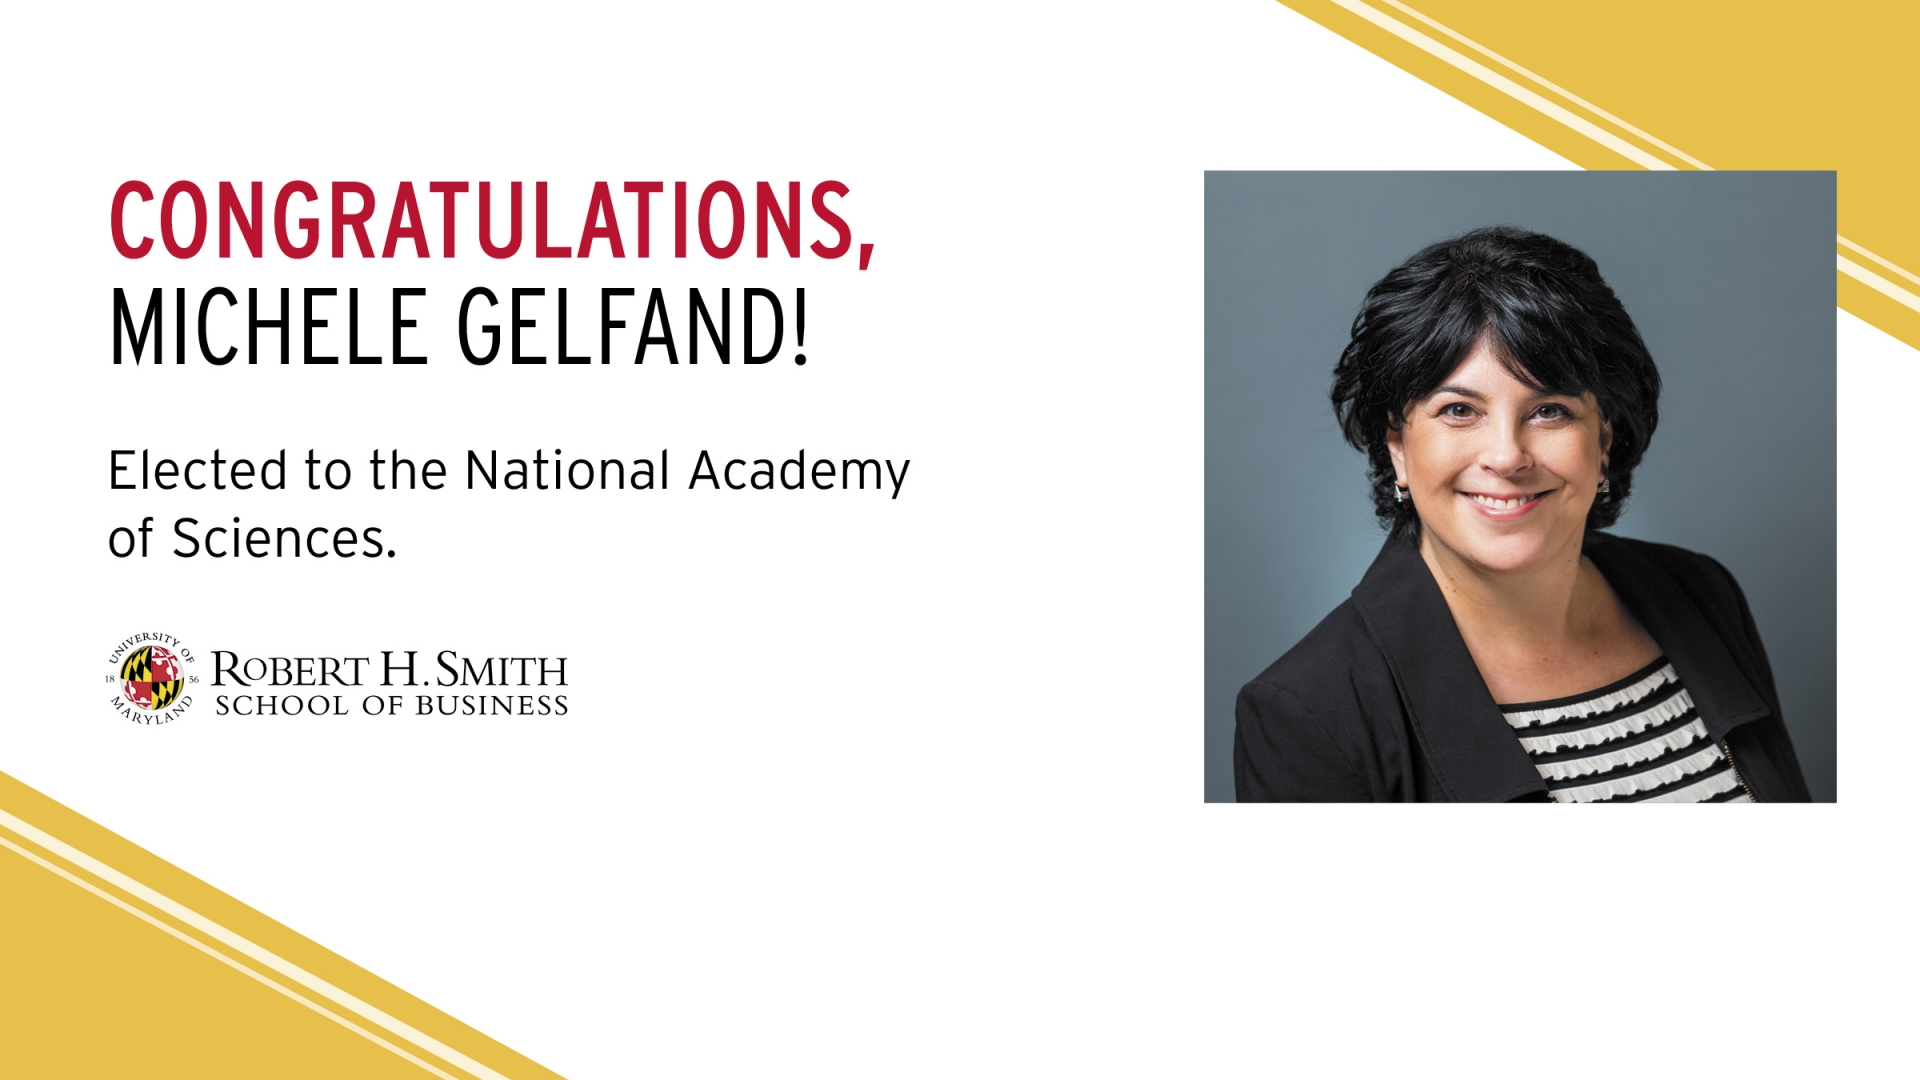 Gelfand Elected to National Academy of Sciences